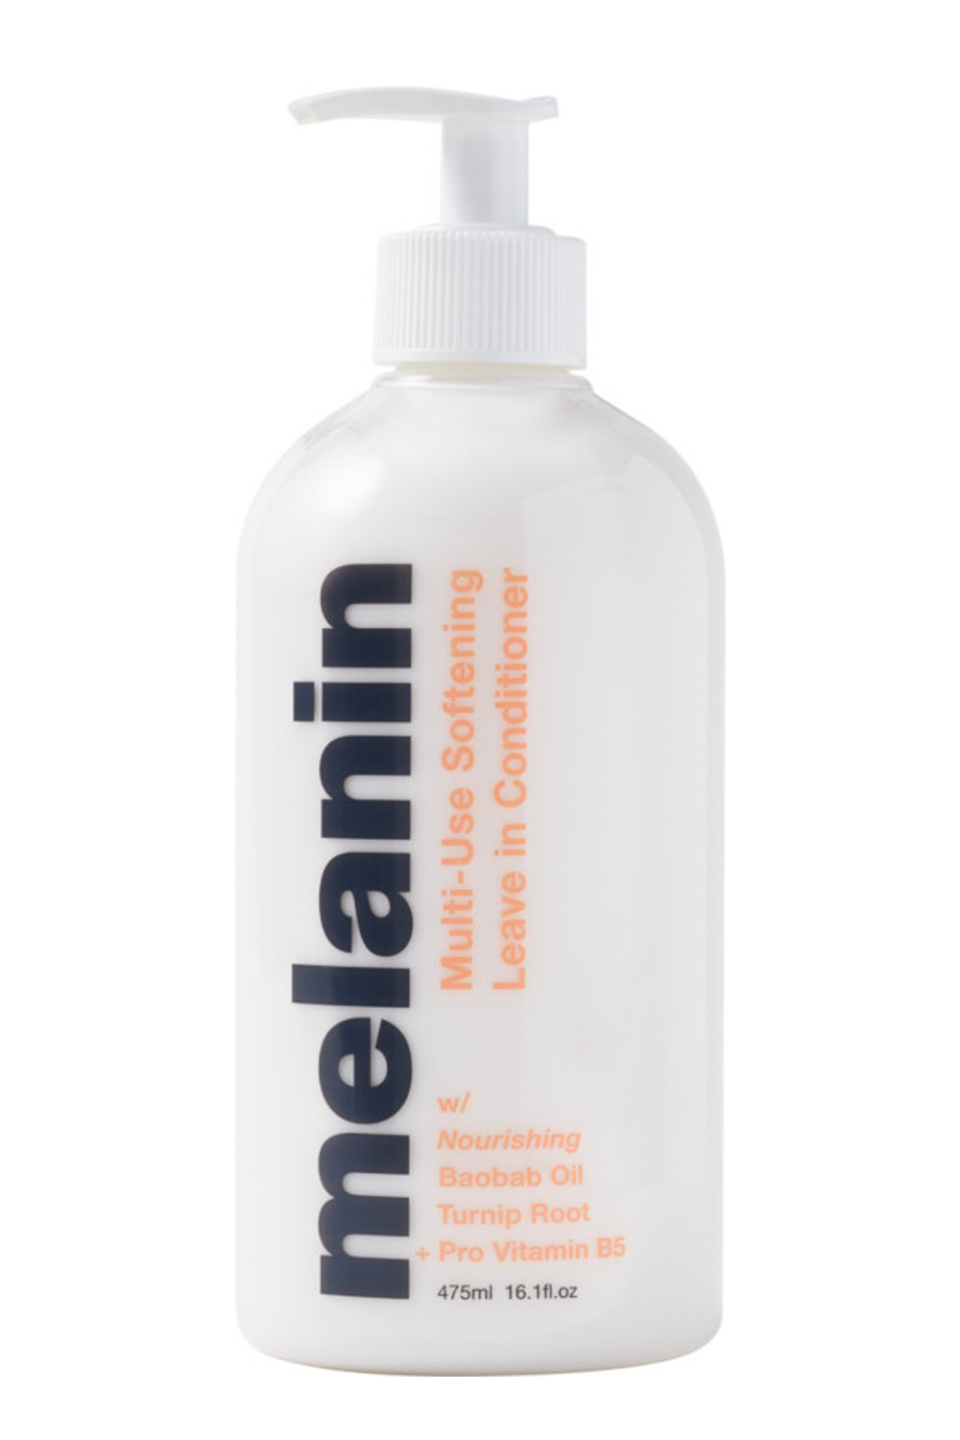 5) Melanin Haircare Multi-Use Softening Leave In Conditioner